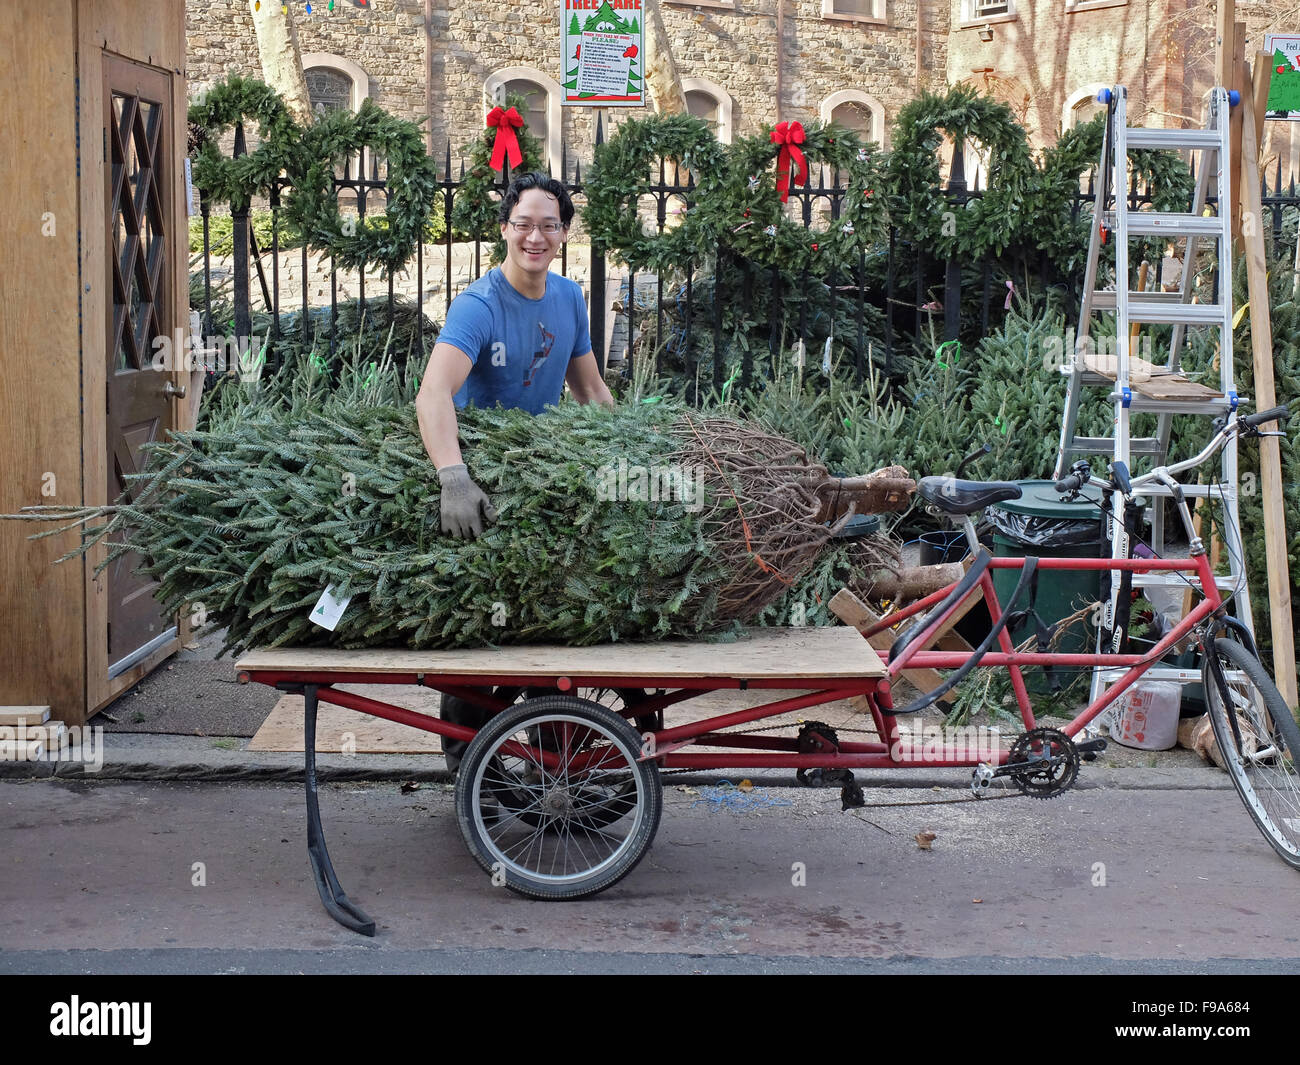 A Christmas tree seller and delivery man at work on Second ave. in the East Village in lower Manhattan, New York City Stock Photo